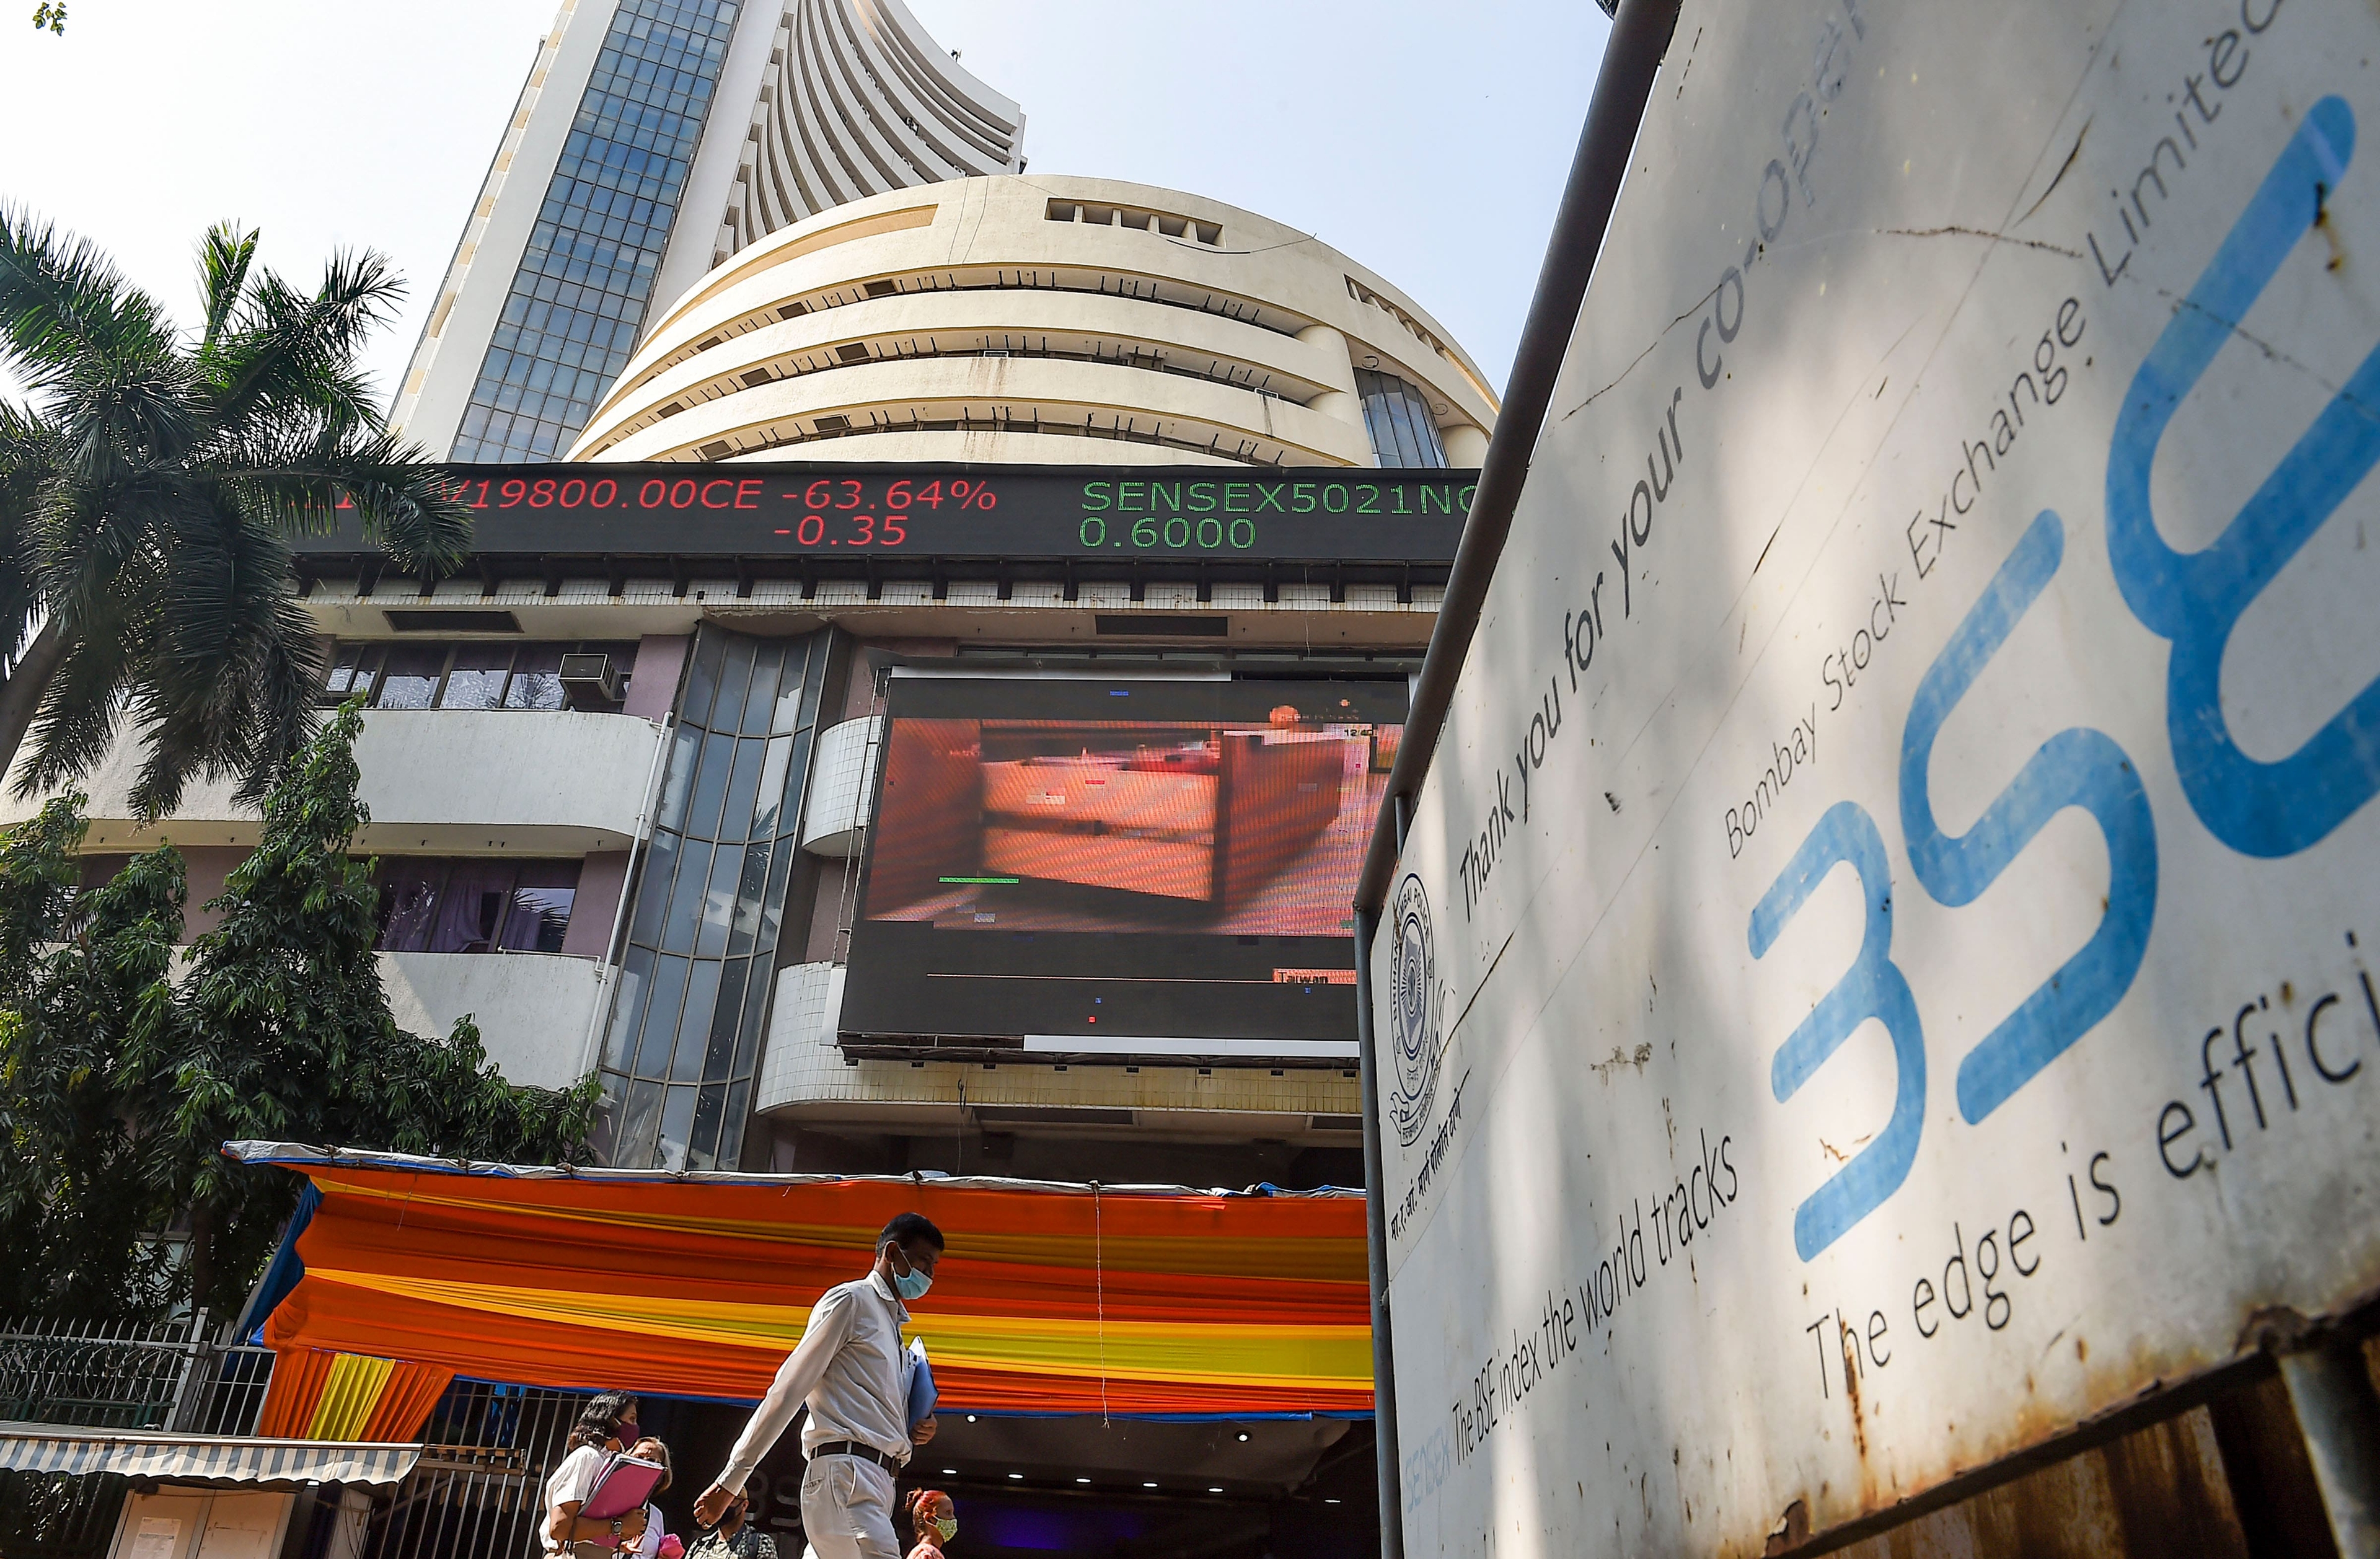 Strong gains led by banking and financial heavyweights lifted equity benchmarks the Sensex and the Nifty more than 2 percent higher each on April 4 as investor sentiment was boosted by the HDFC-HDFC Bank merger announcement. The 30-share pack, however, cooled off slightly and closed 1335 points, or 2.25 percent, up at 60,611.74. Nifty ended the day at 18,053.40, up 383 points, or 2.17 percent. With this, the market extended the gains into the second consecutive session.